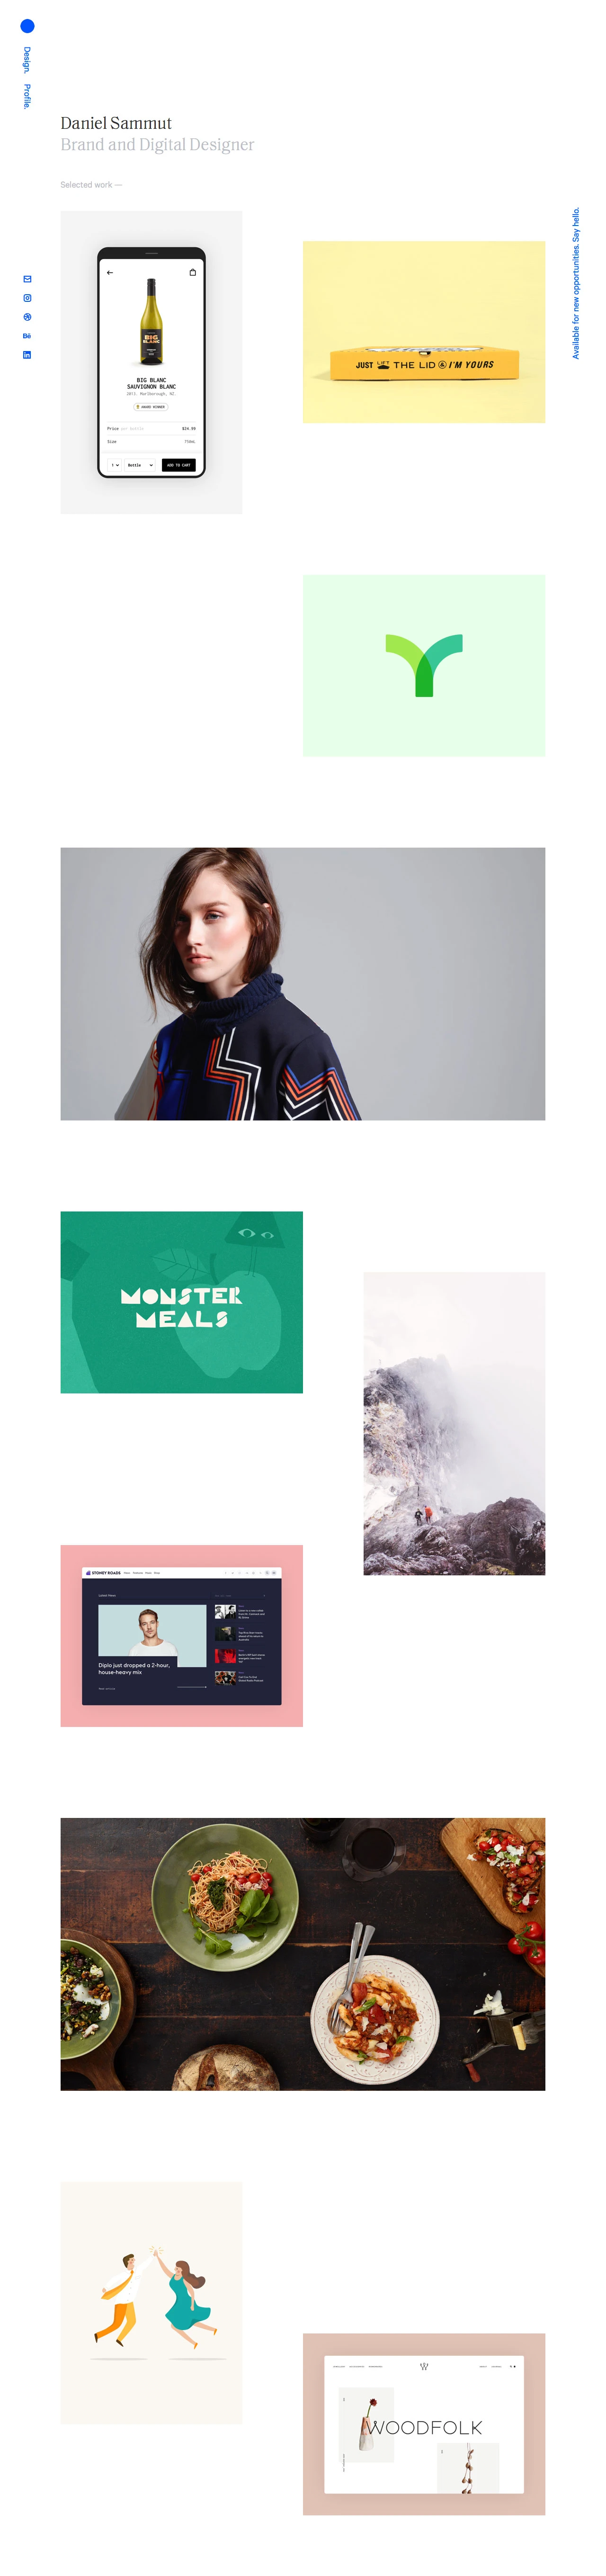 Daniel Sammut Landing Page Example: I help startups and businesses come to life through crafted brand identities and enjoyable digital experiences.